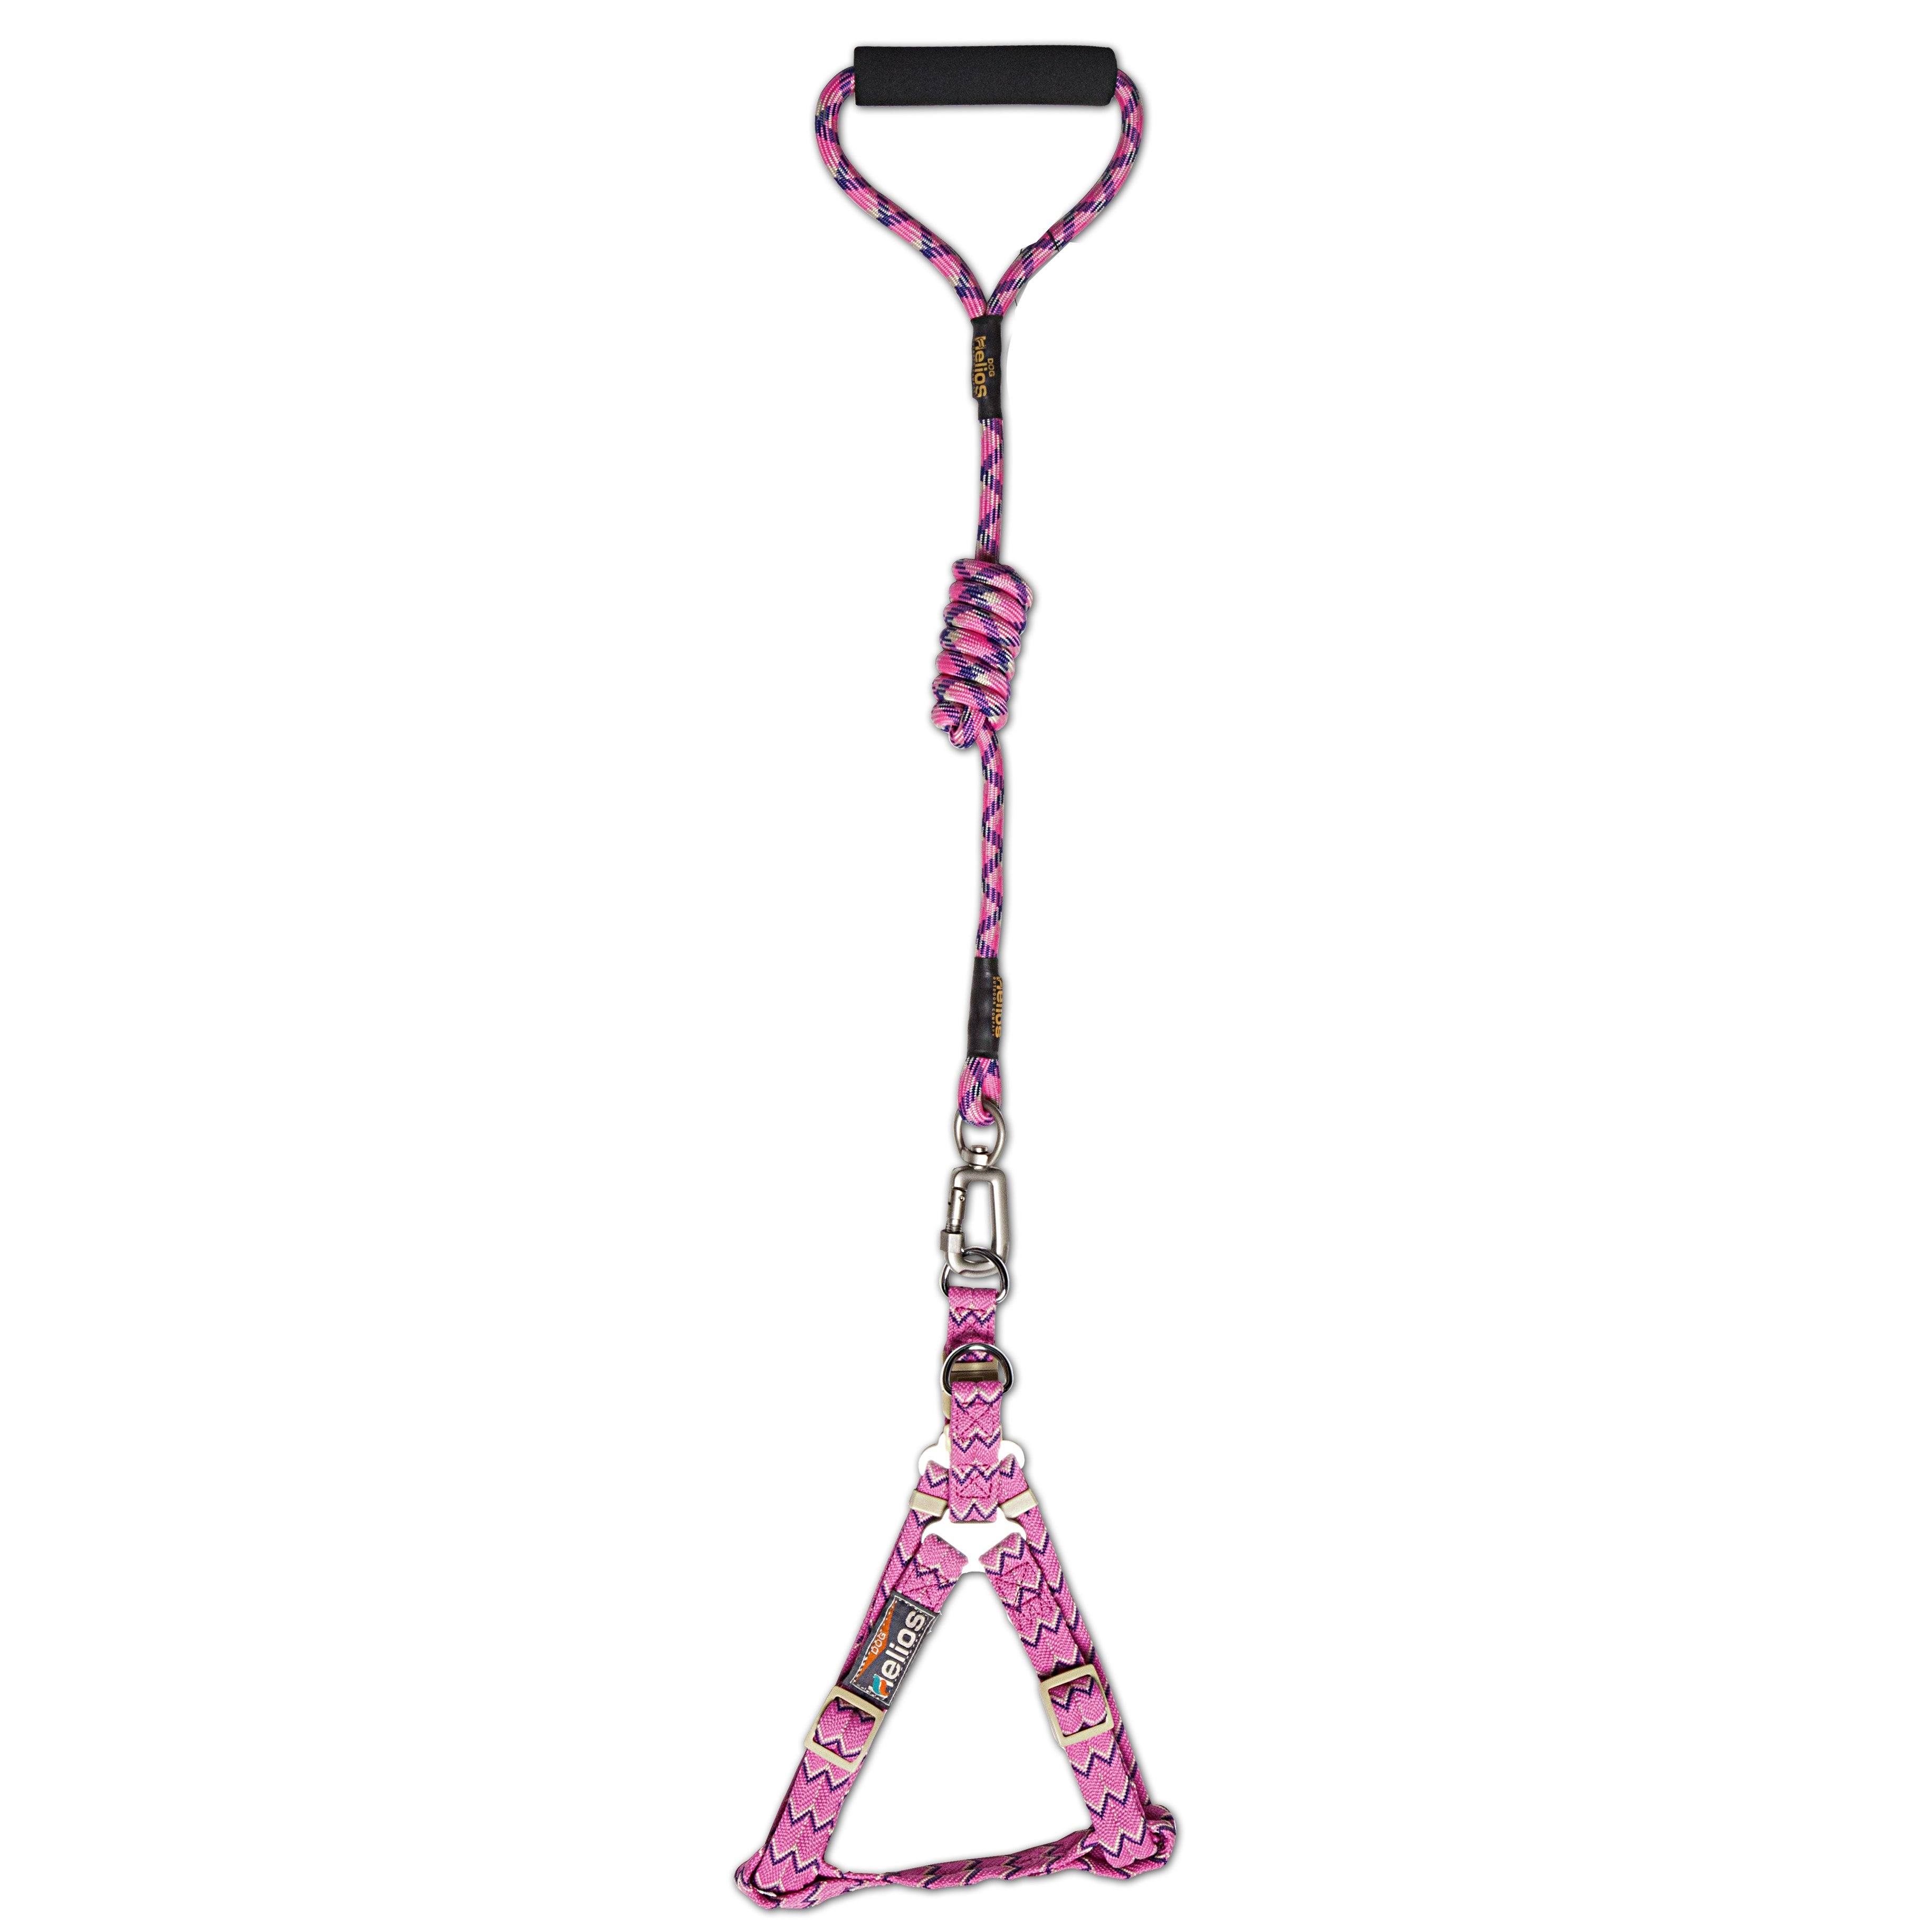 Dog Helios 'Surfside' Adjustable Dog Harness and Leash Small Pink